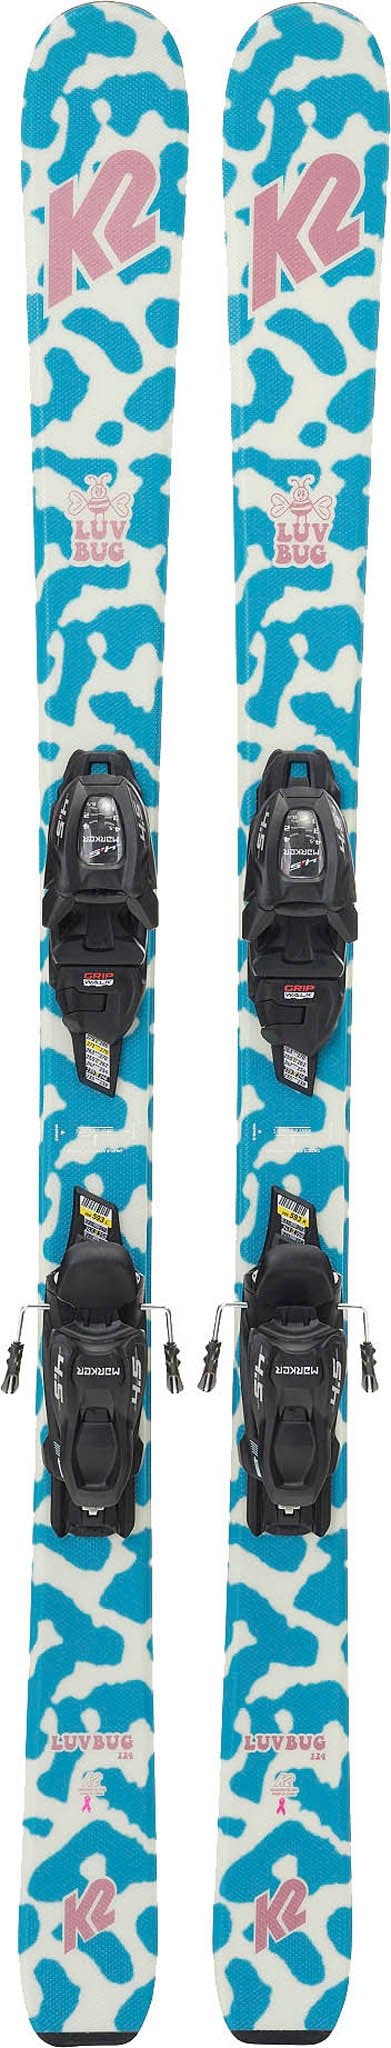 Product image for Luv Bug 4.5 Fdt Ski - Youth